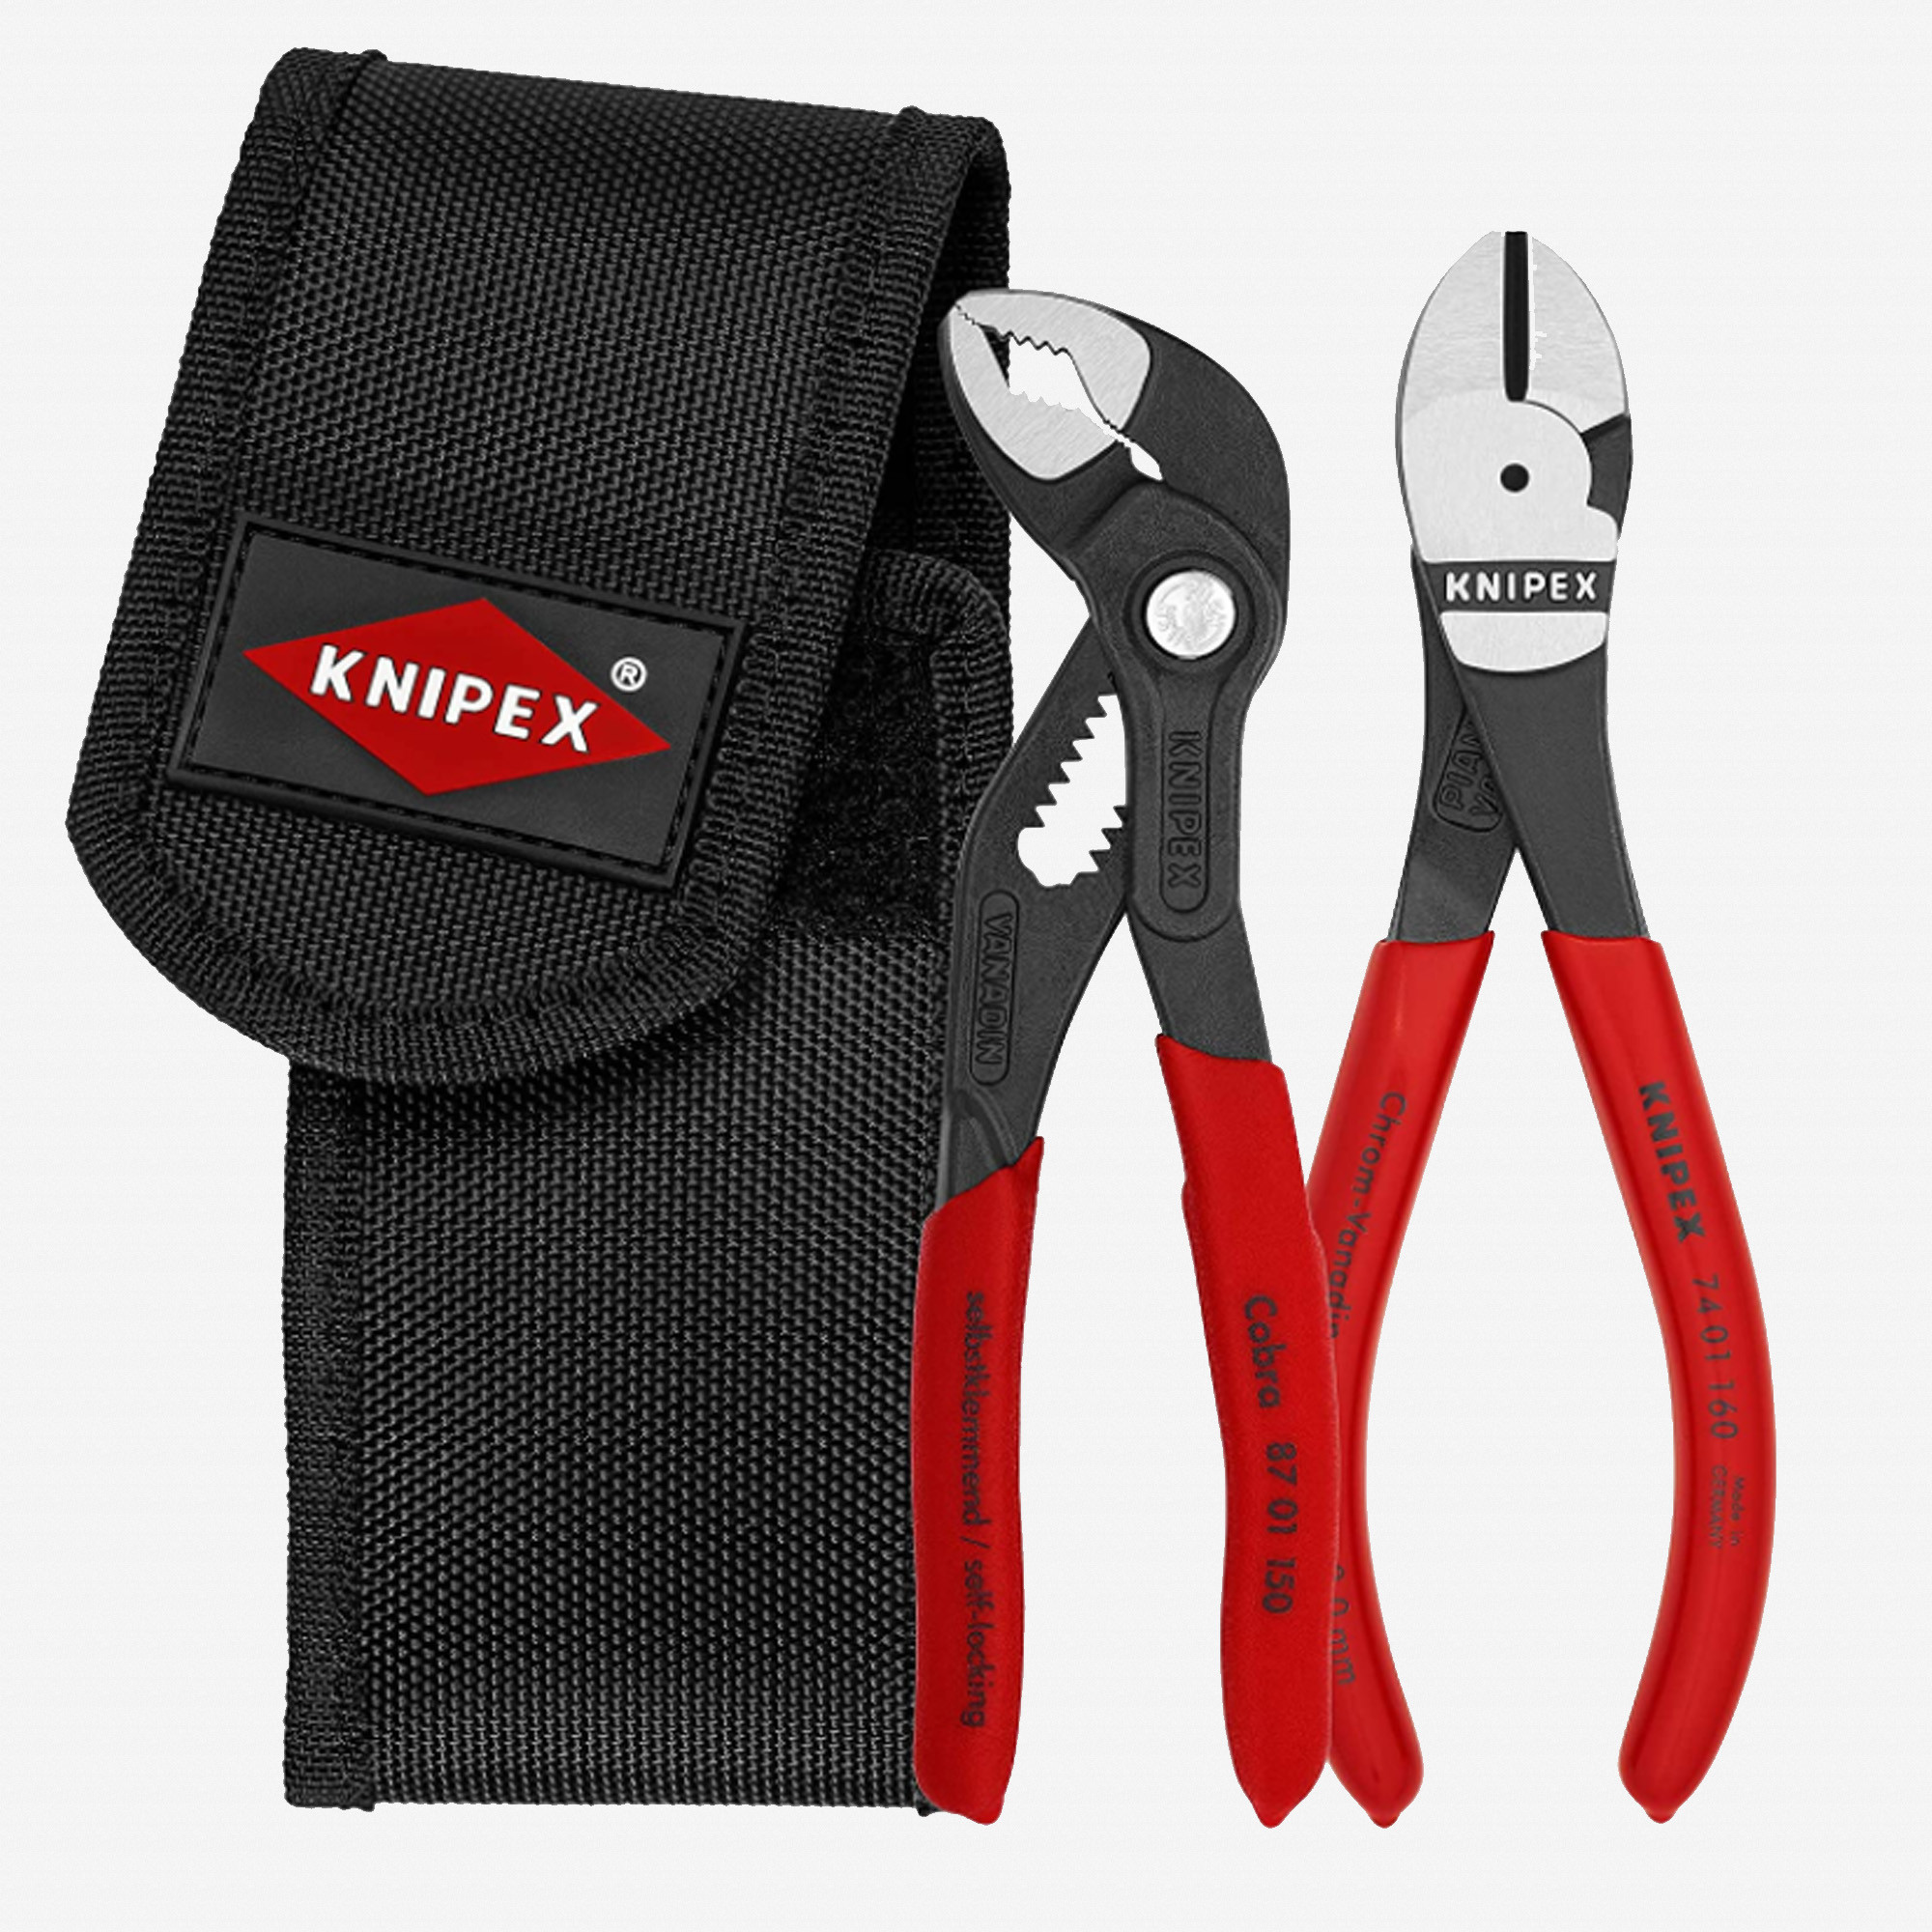 Knipex 2 PC Mini Pliers With Belt Pouch